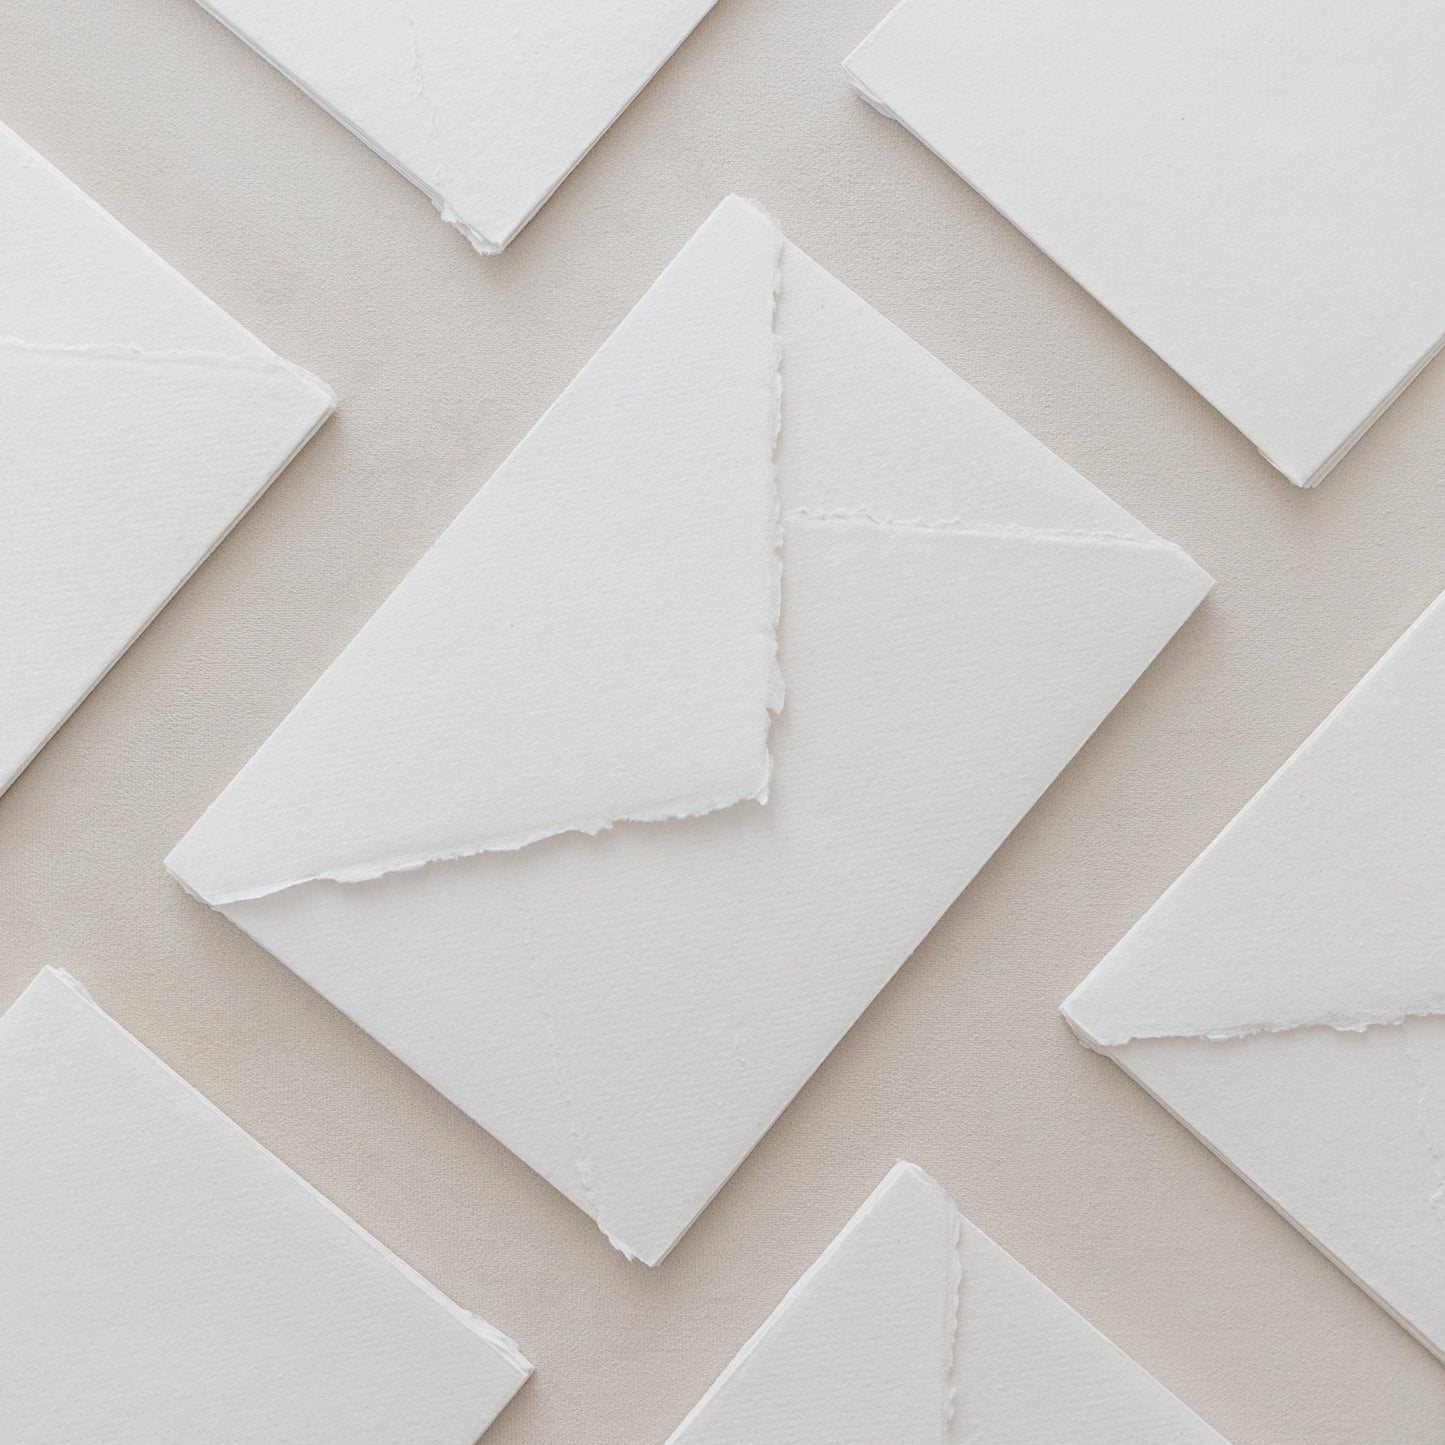 Add Double Sided Adhesive – Handmade Paper Envelopes